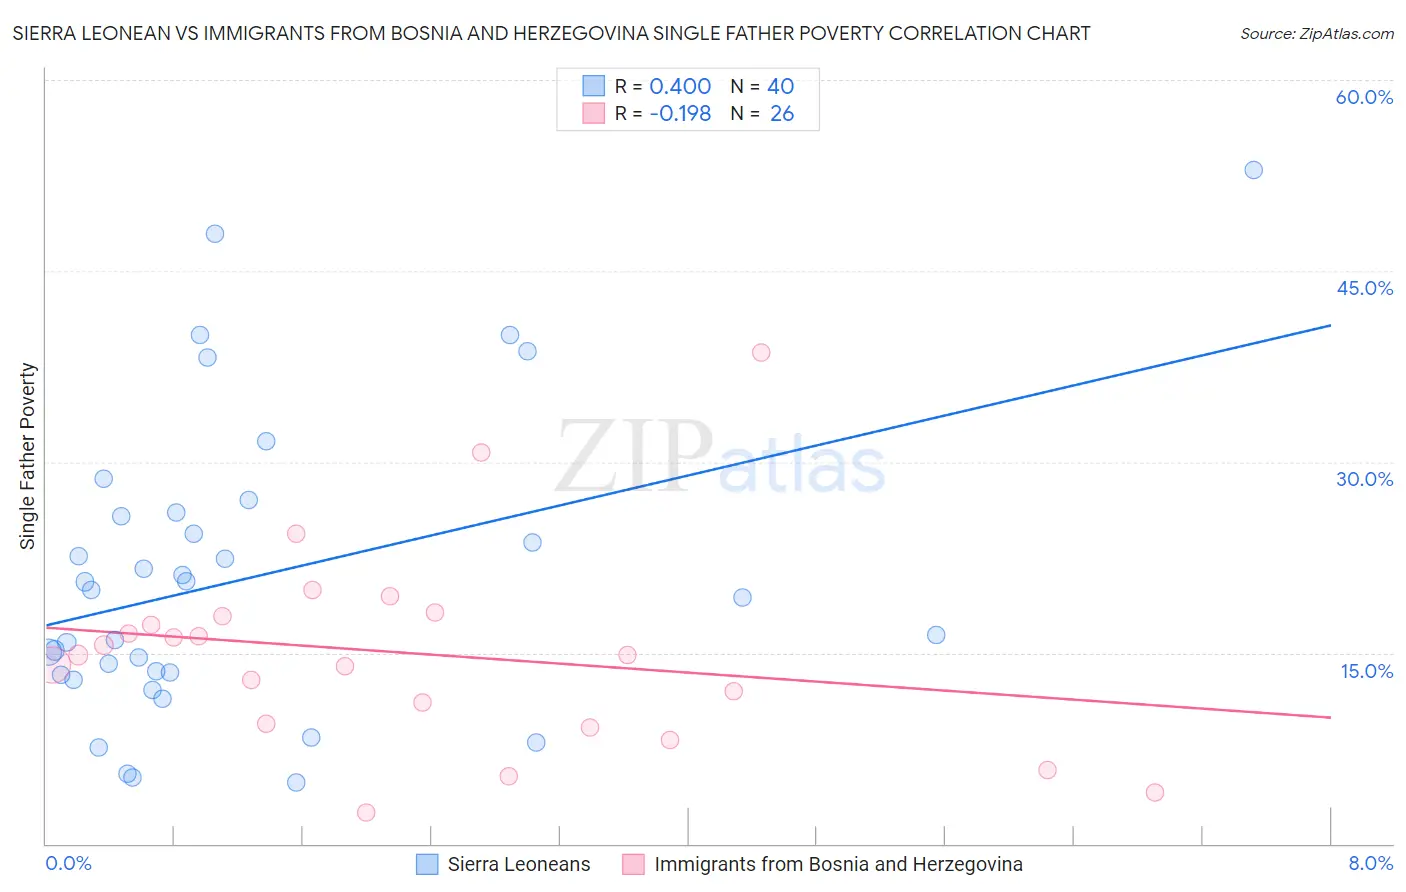 Sierra Leonean vs Immigrants from Bosnia and Herzegovina Single Father Poverty